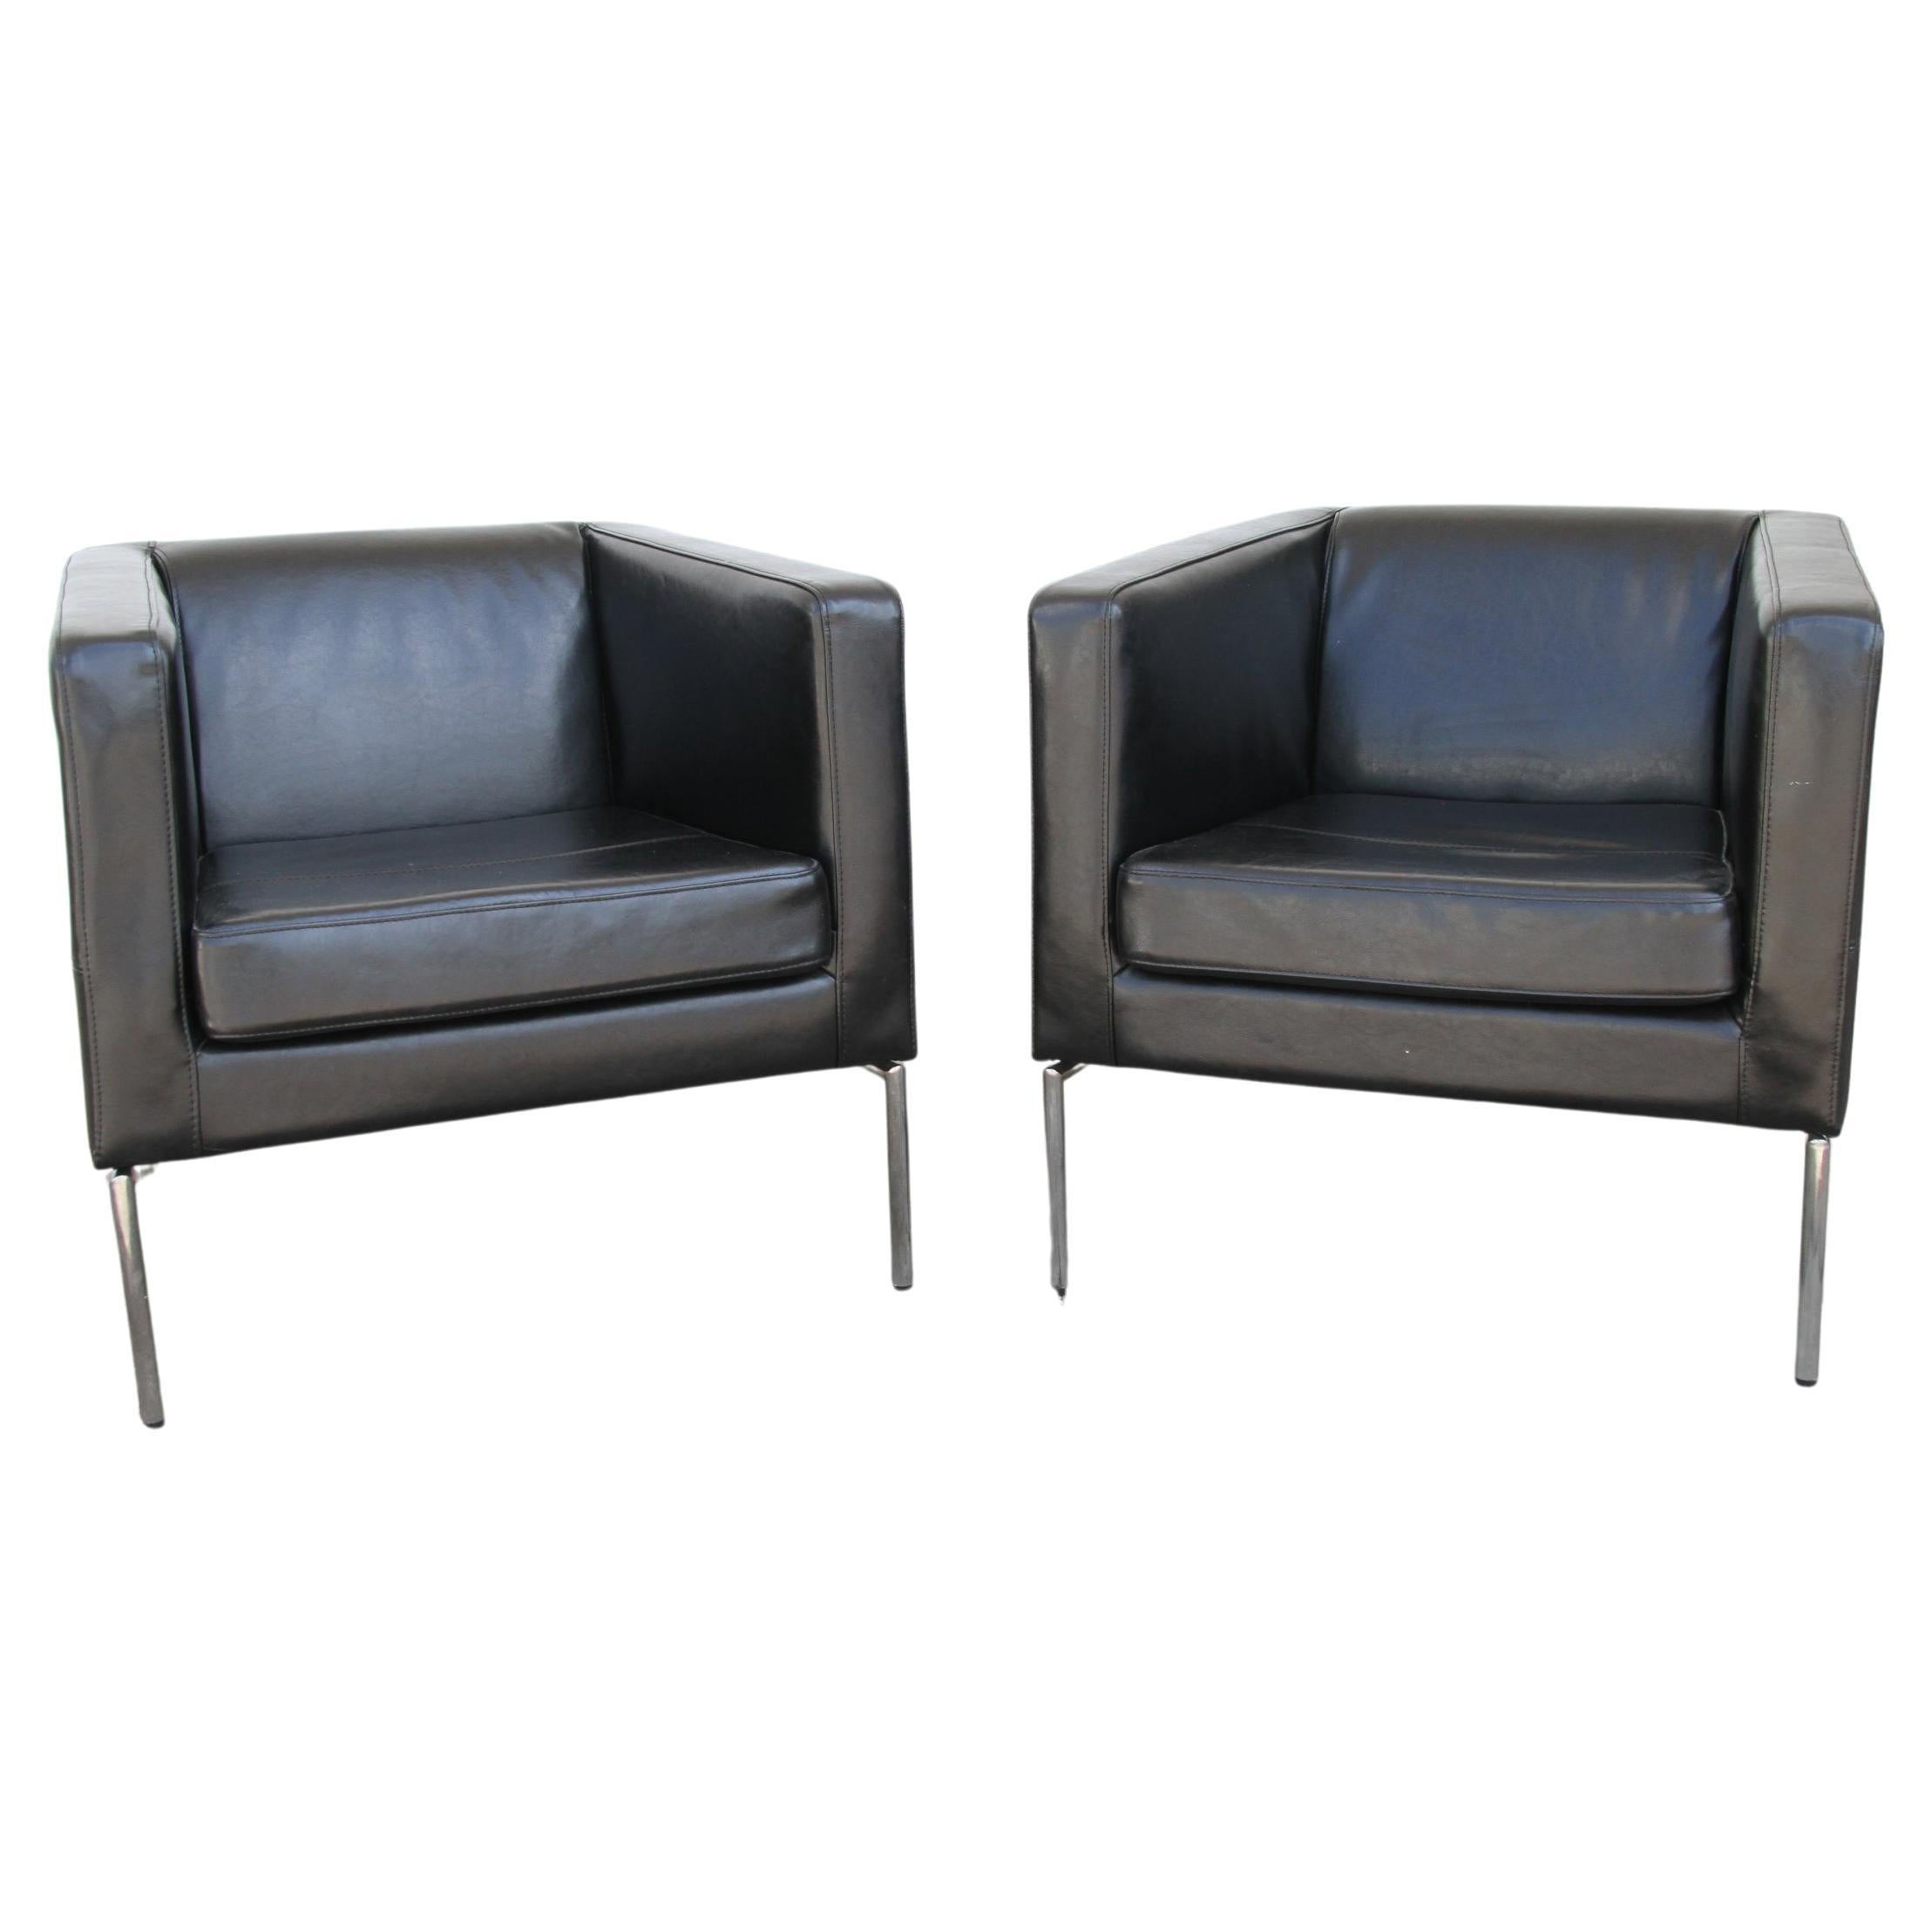 Black leather club chairs